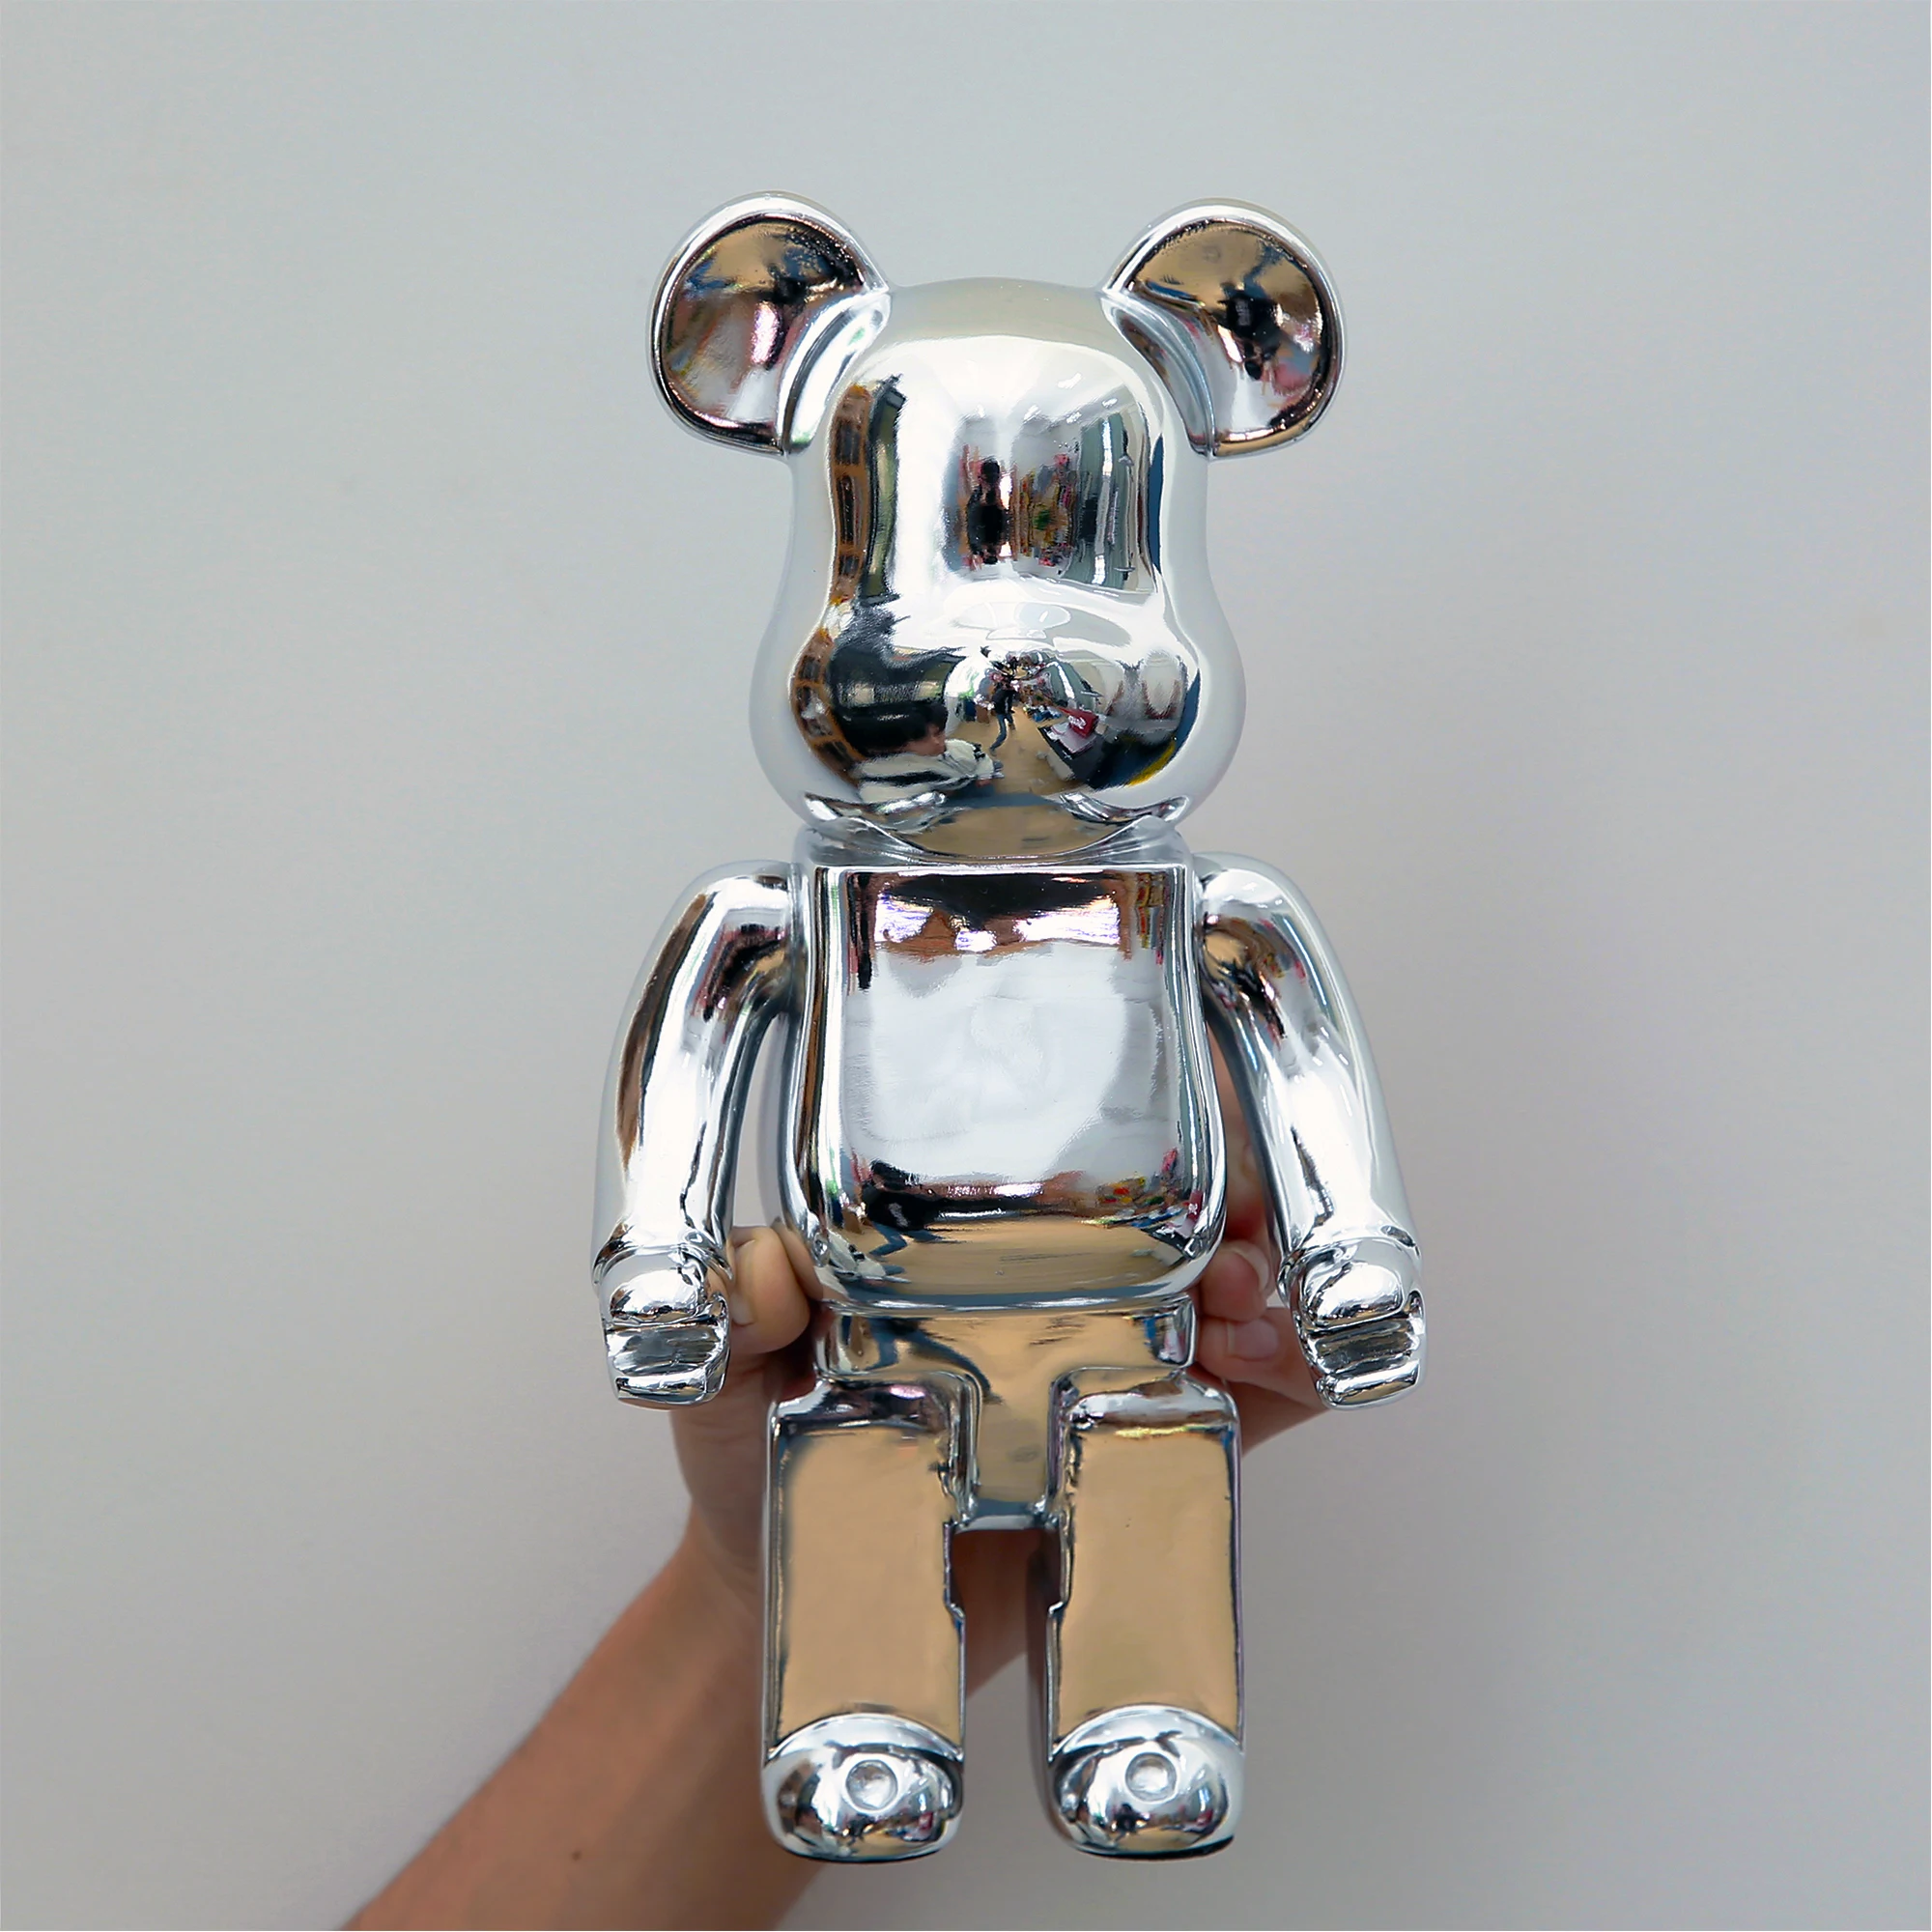 Details about   Bearbrick Action Figure Ornament Toy Collection 28CM White UK SELLER NEW 